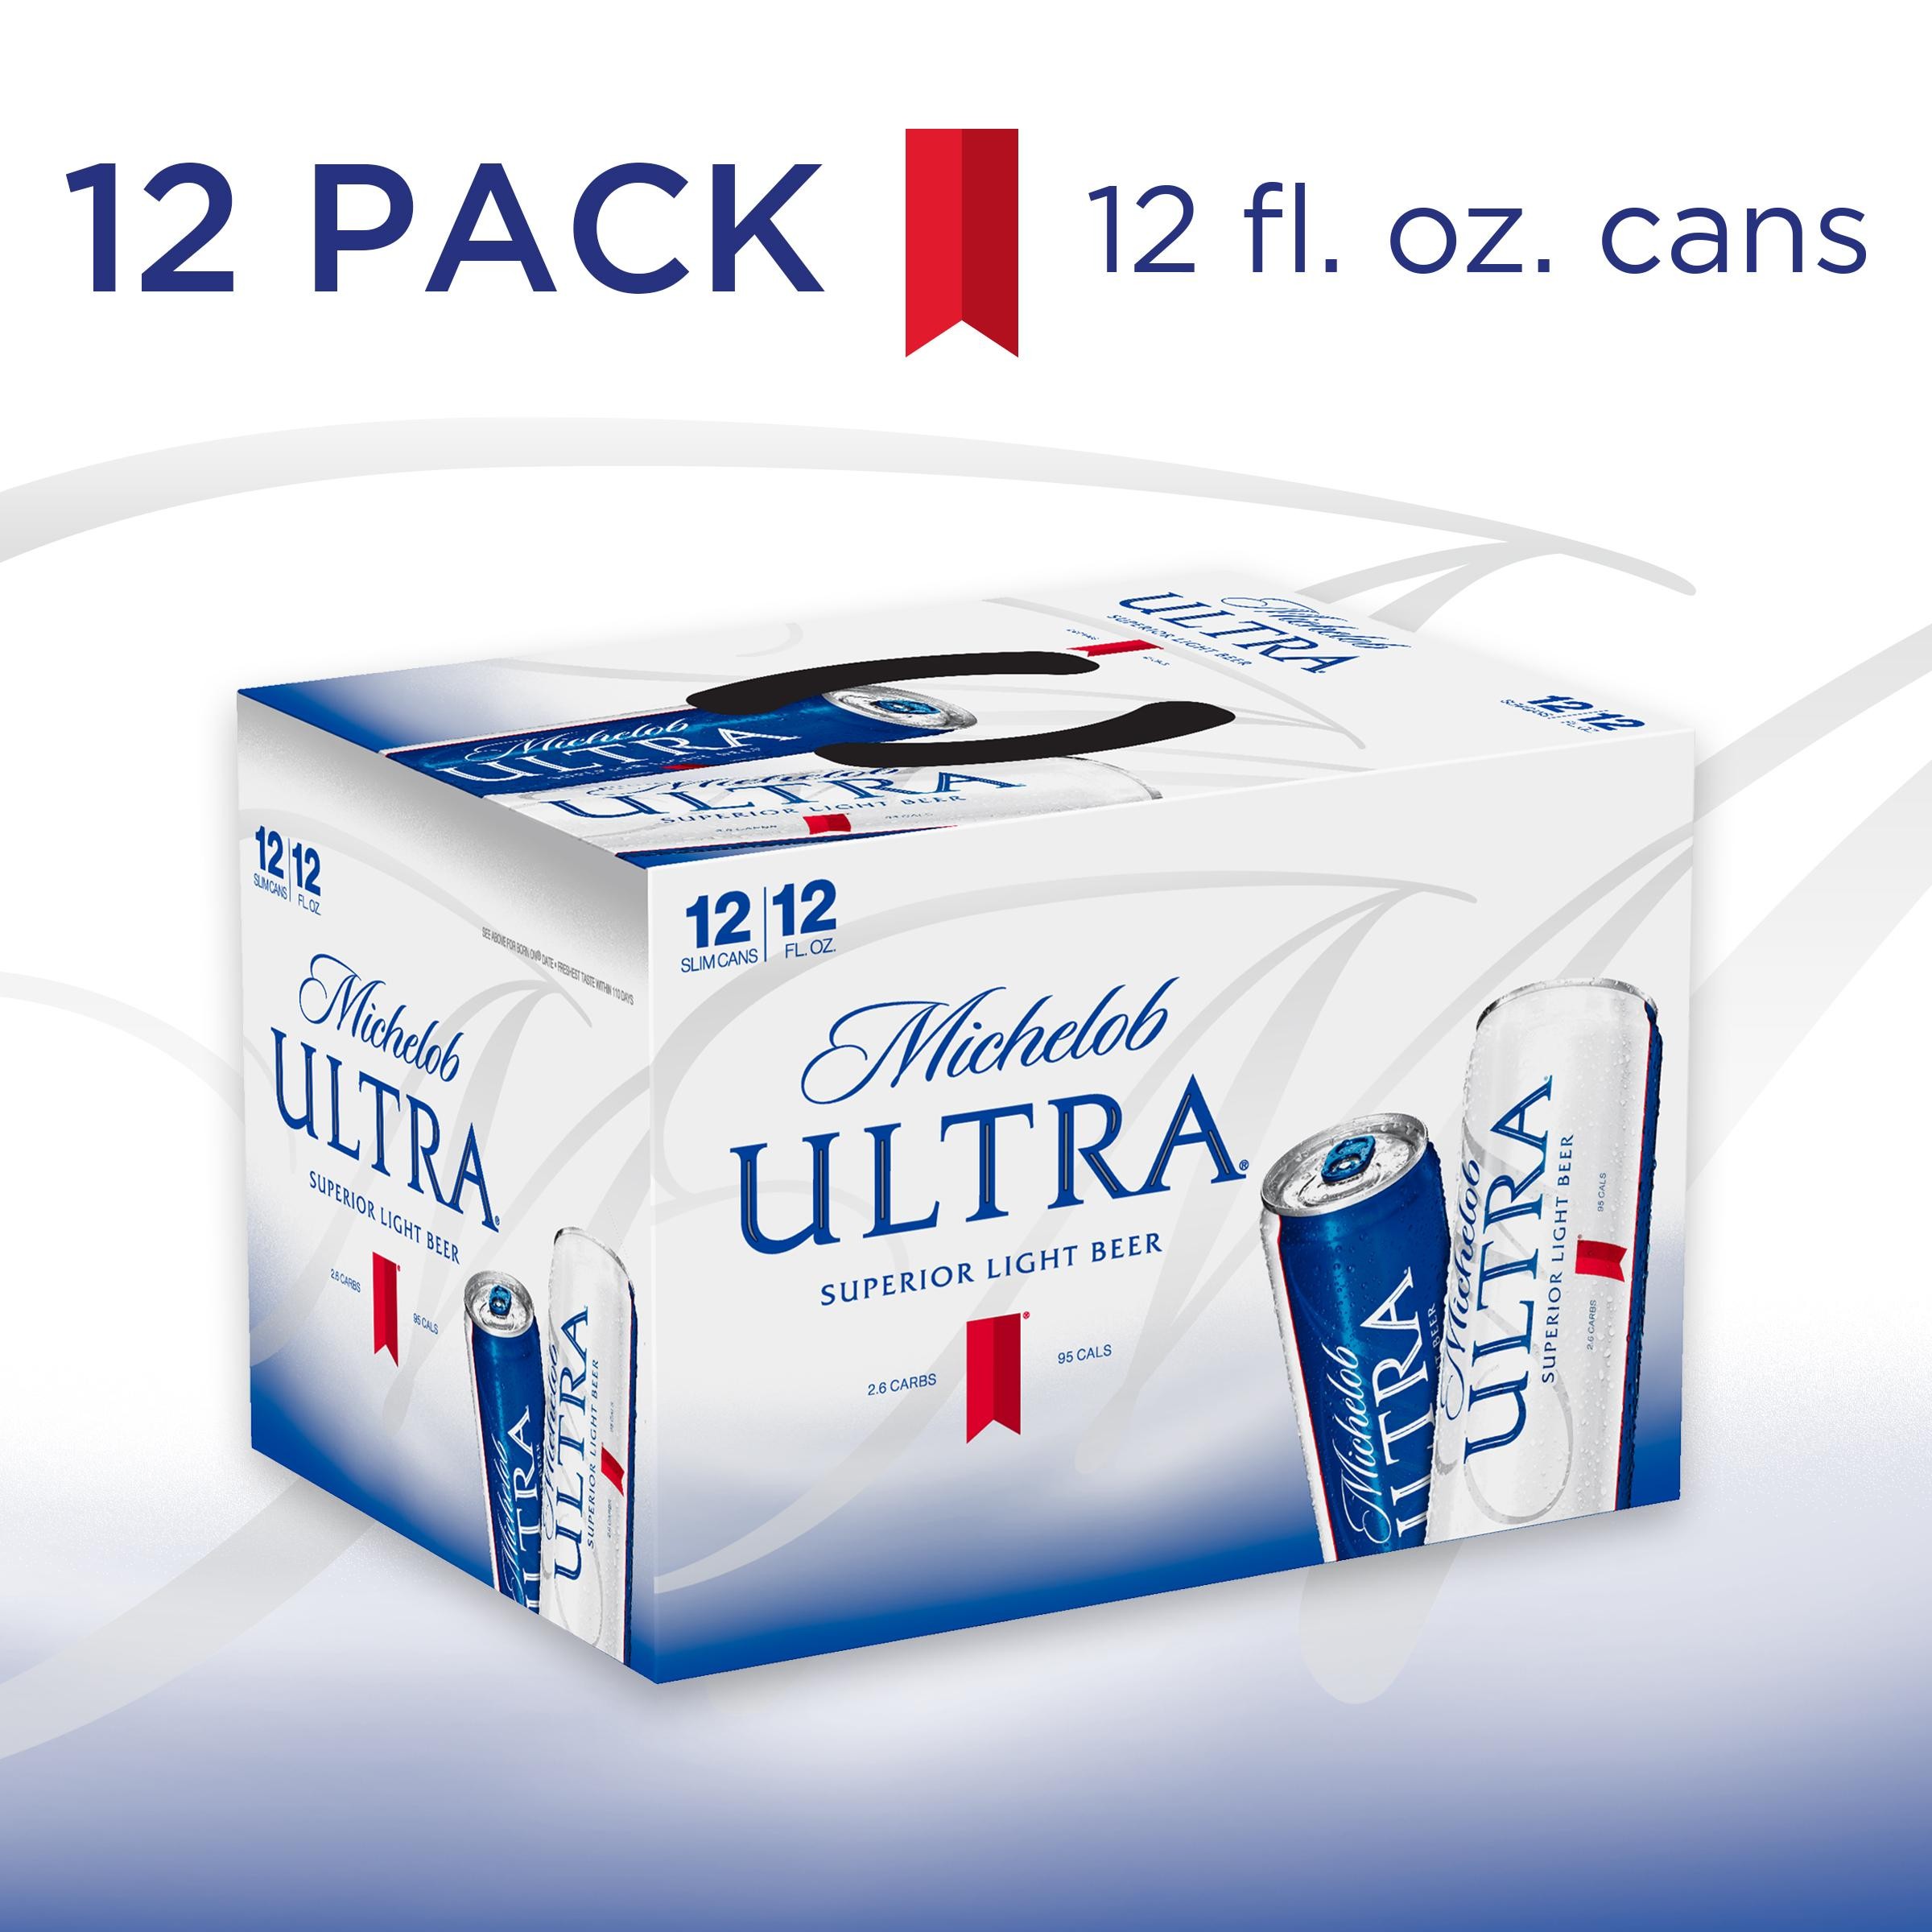 Michelob Ultra Light Beer - 12 Pack can